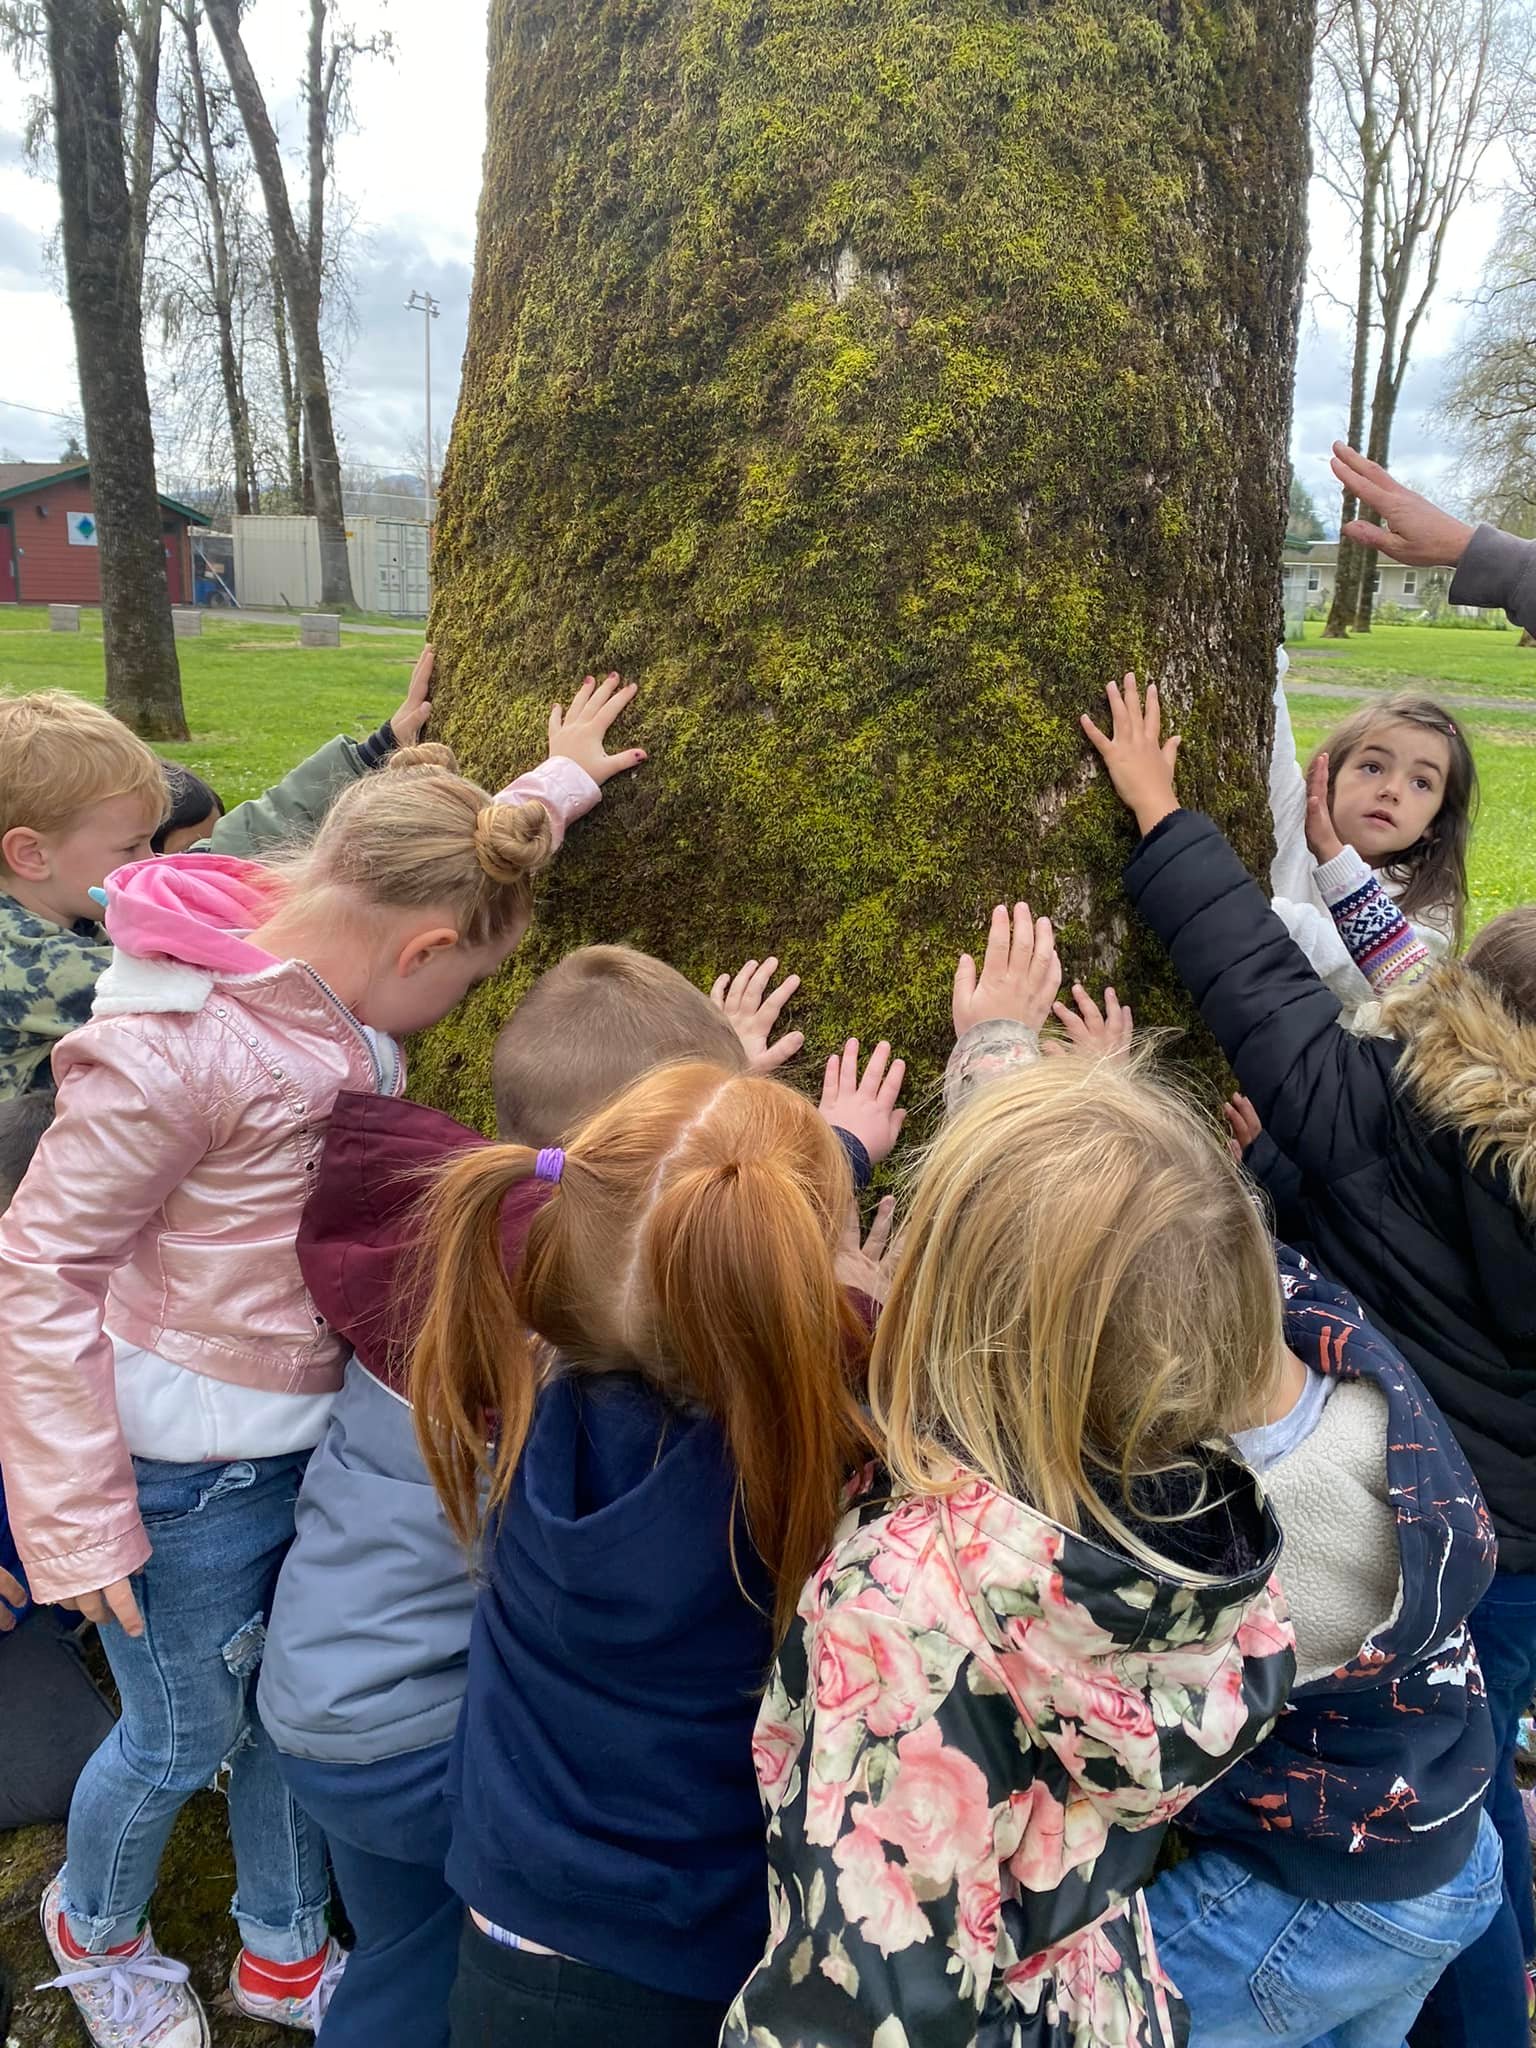 eight adorable preschoolers clustered tight around a mossy tree. they are petting the moss